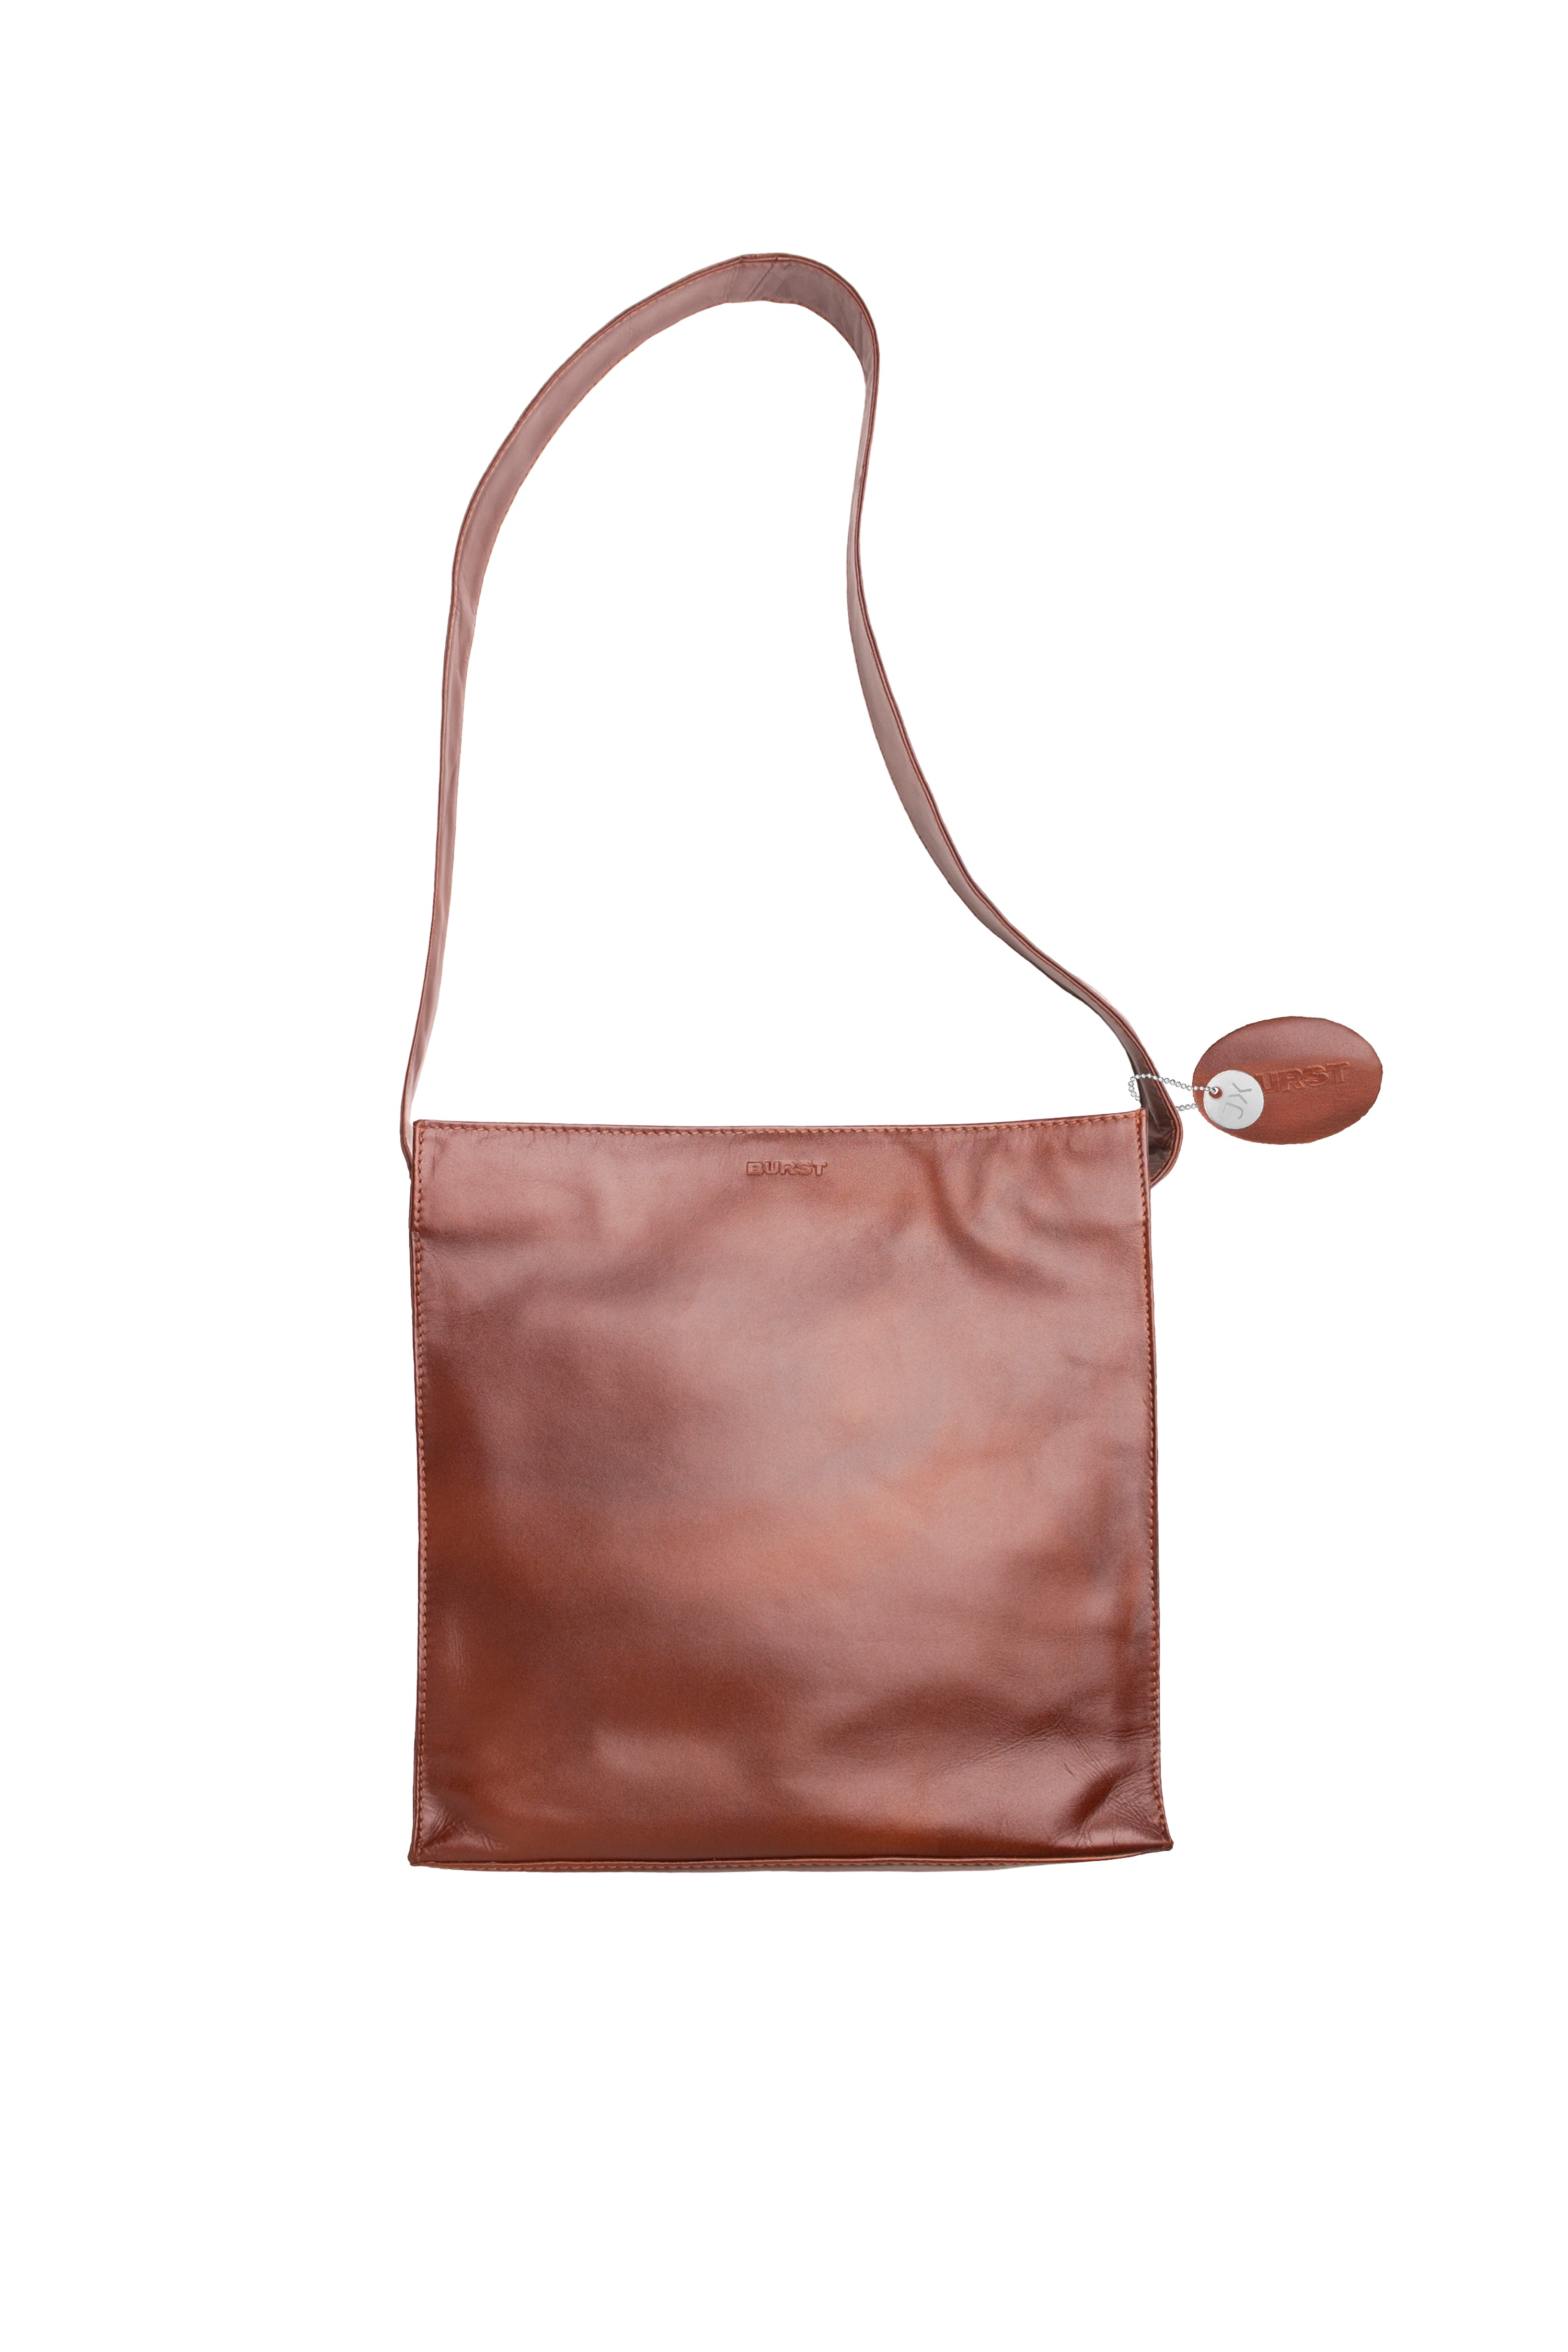 Caramel finished leather large cross body bag. Chic wide strap. Chestnut brown with vivid burnt Sienna lining and stitch. Upcycled, sustainable.